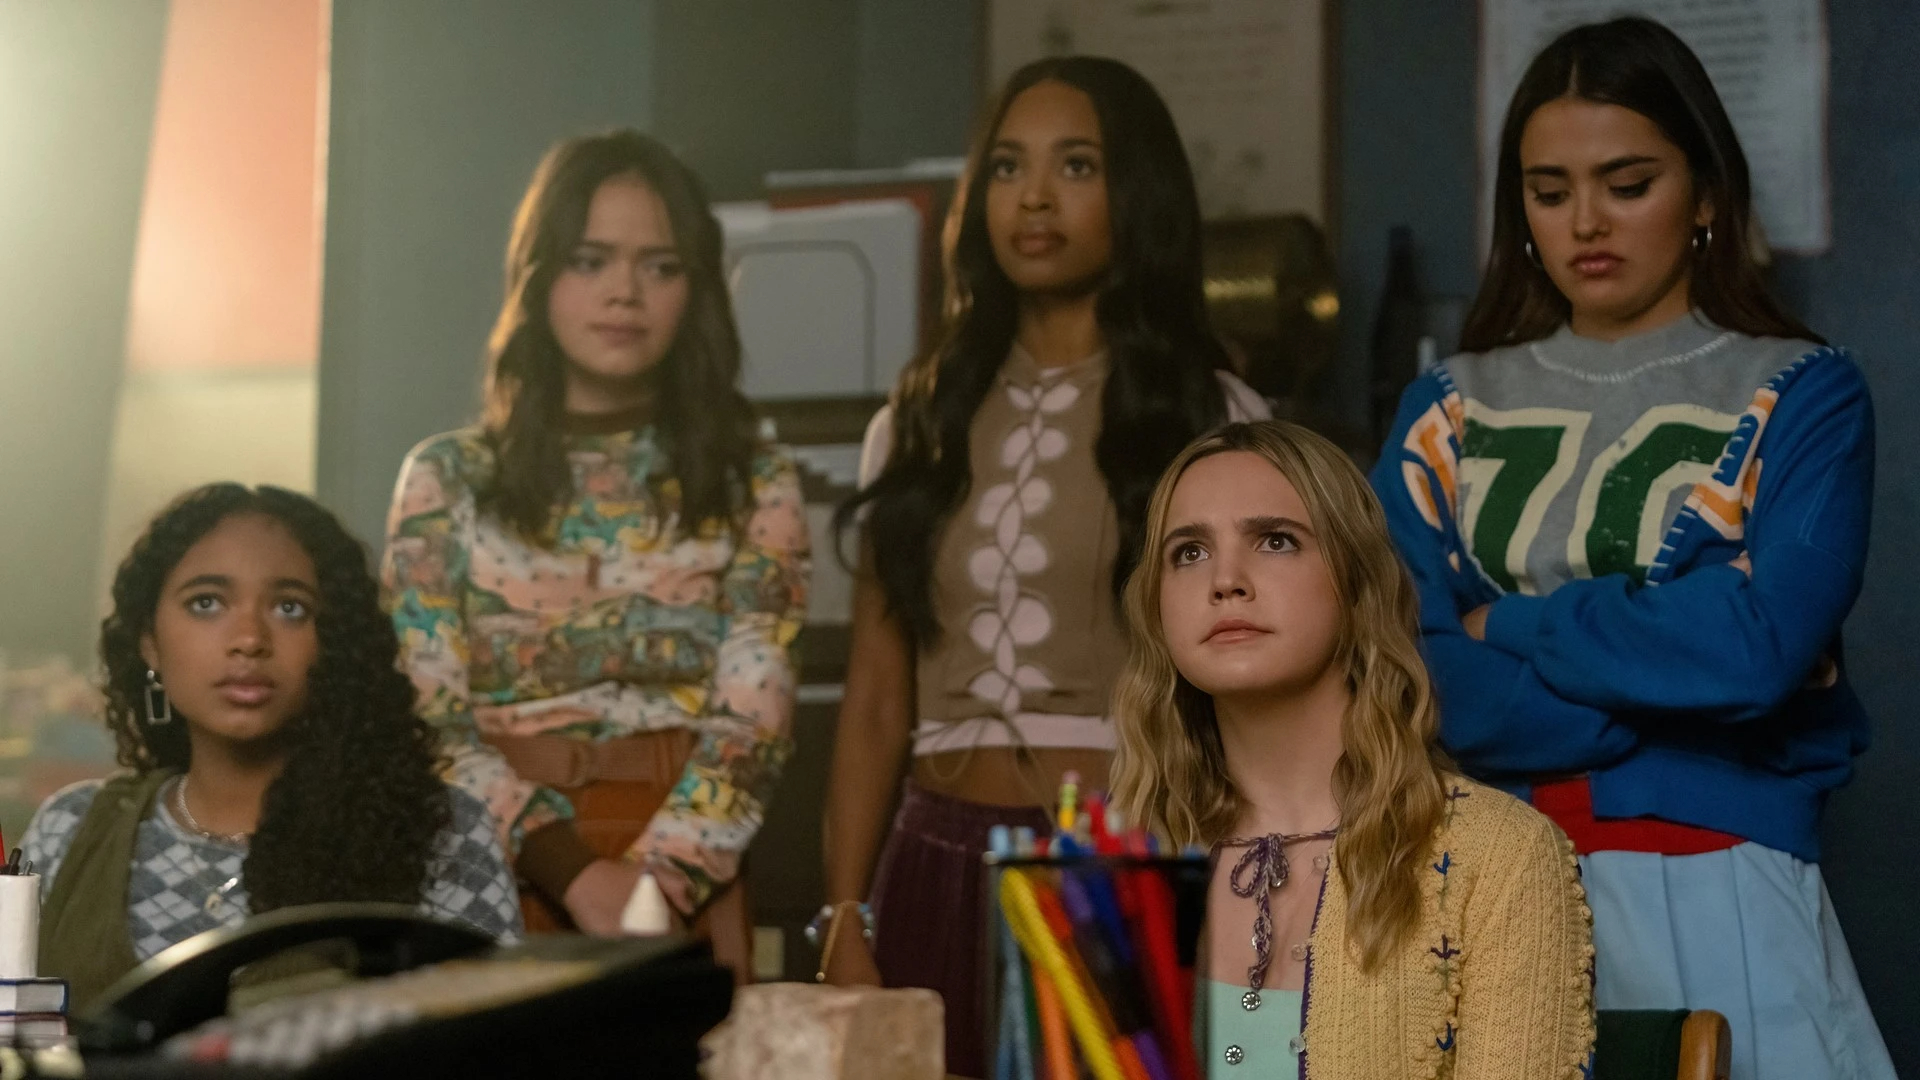 Pretty Little Liars: Original Sin: The Liars stand together.